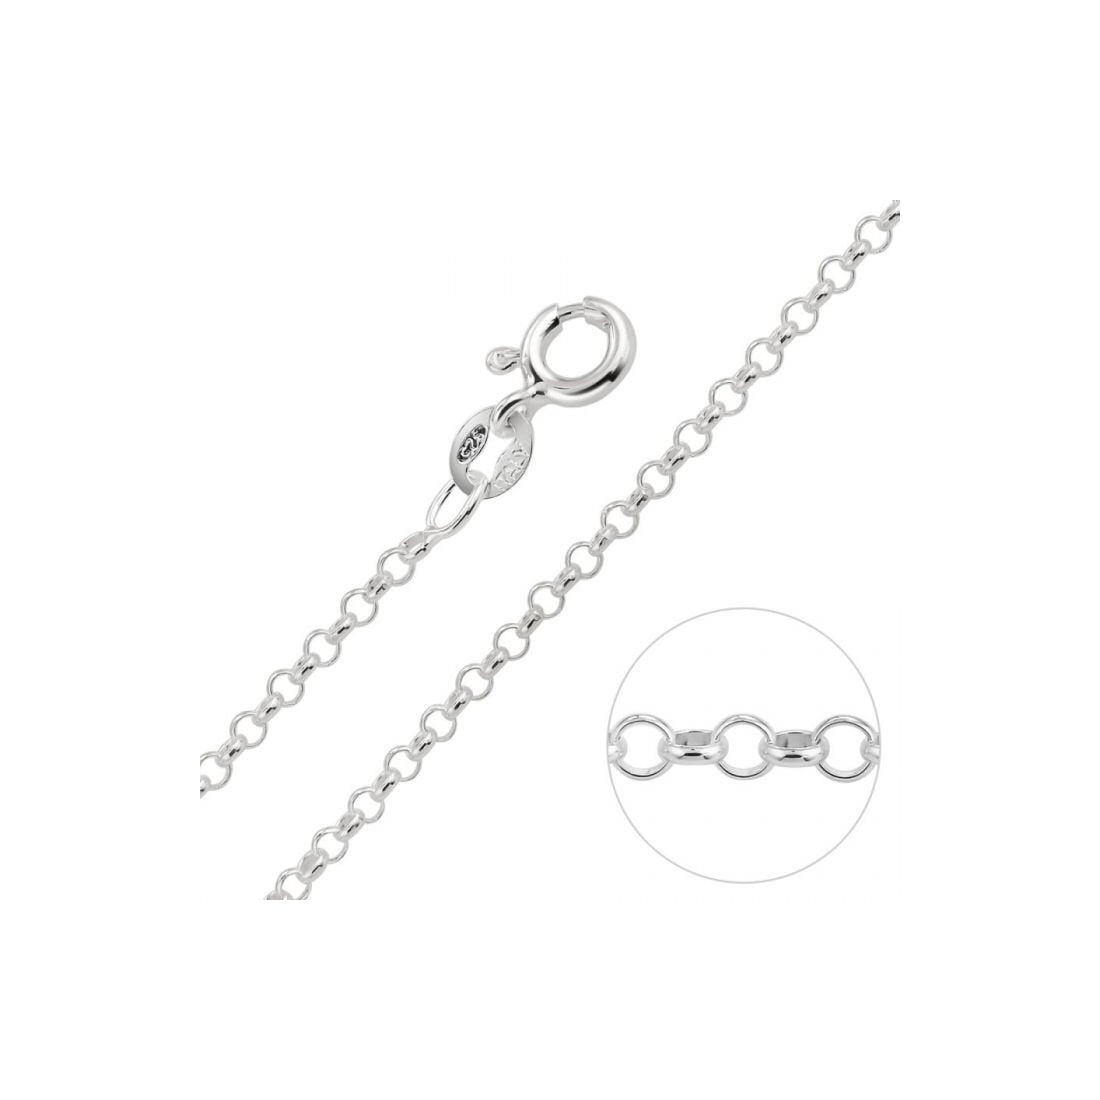 3.7MM Rolo Chain .925 Solid Sterling Silver Available In "7-24" Inches